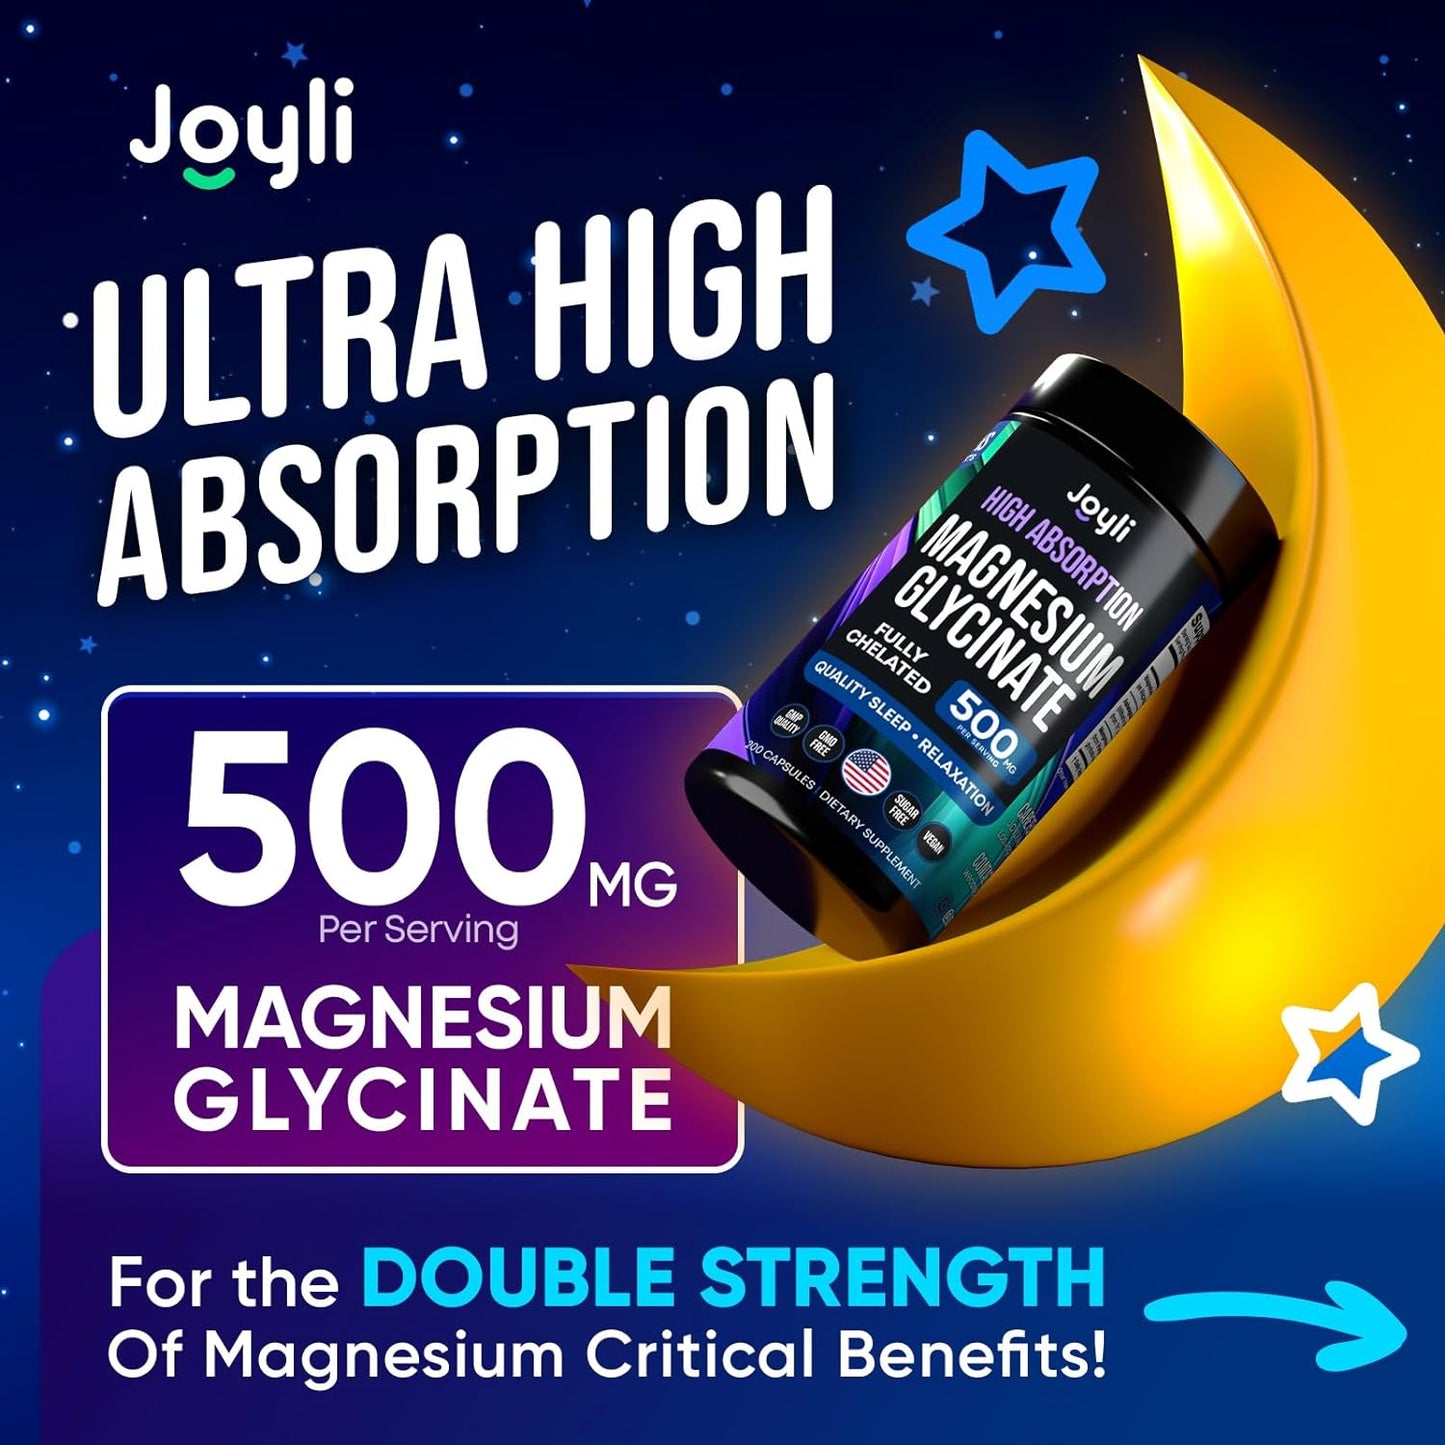 Magnesium Glycinate 500MG Capsules - Magnesium Glycinate for Women & Men, Kids & Adults - Magnesium for Bedtime & Relaxation - Ashwagandha Root Extract + Manganese - 200 Vegan Capsules